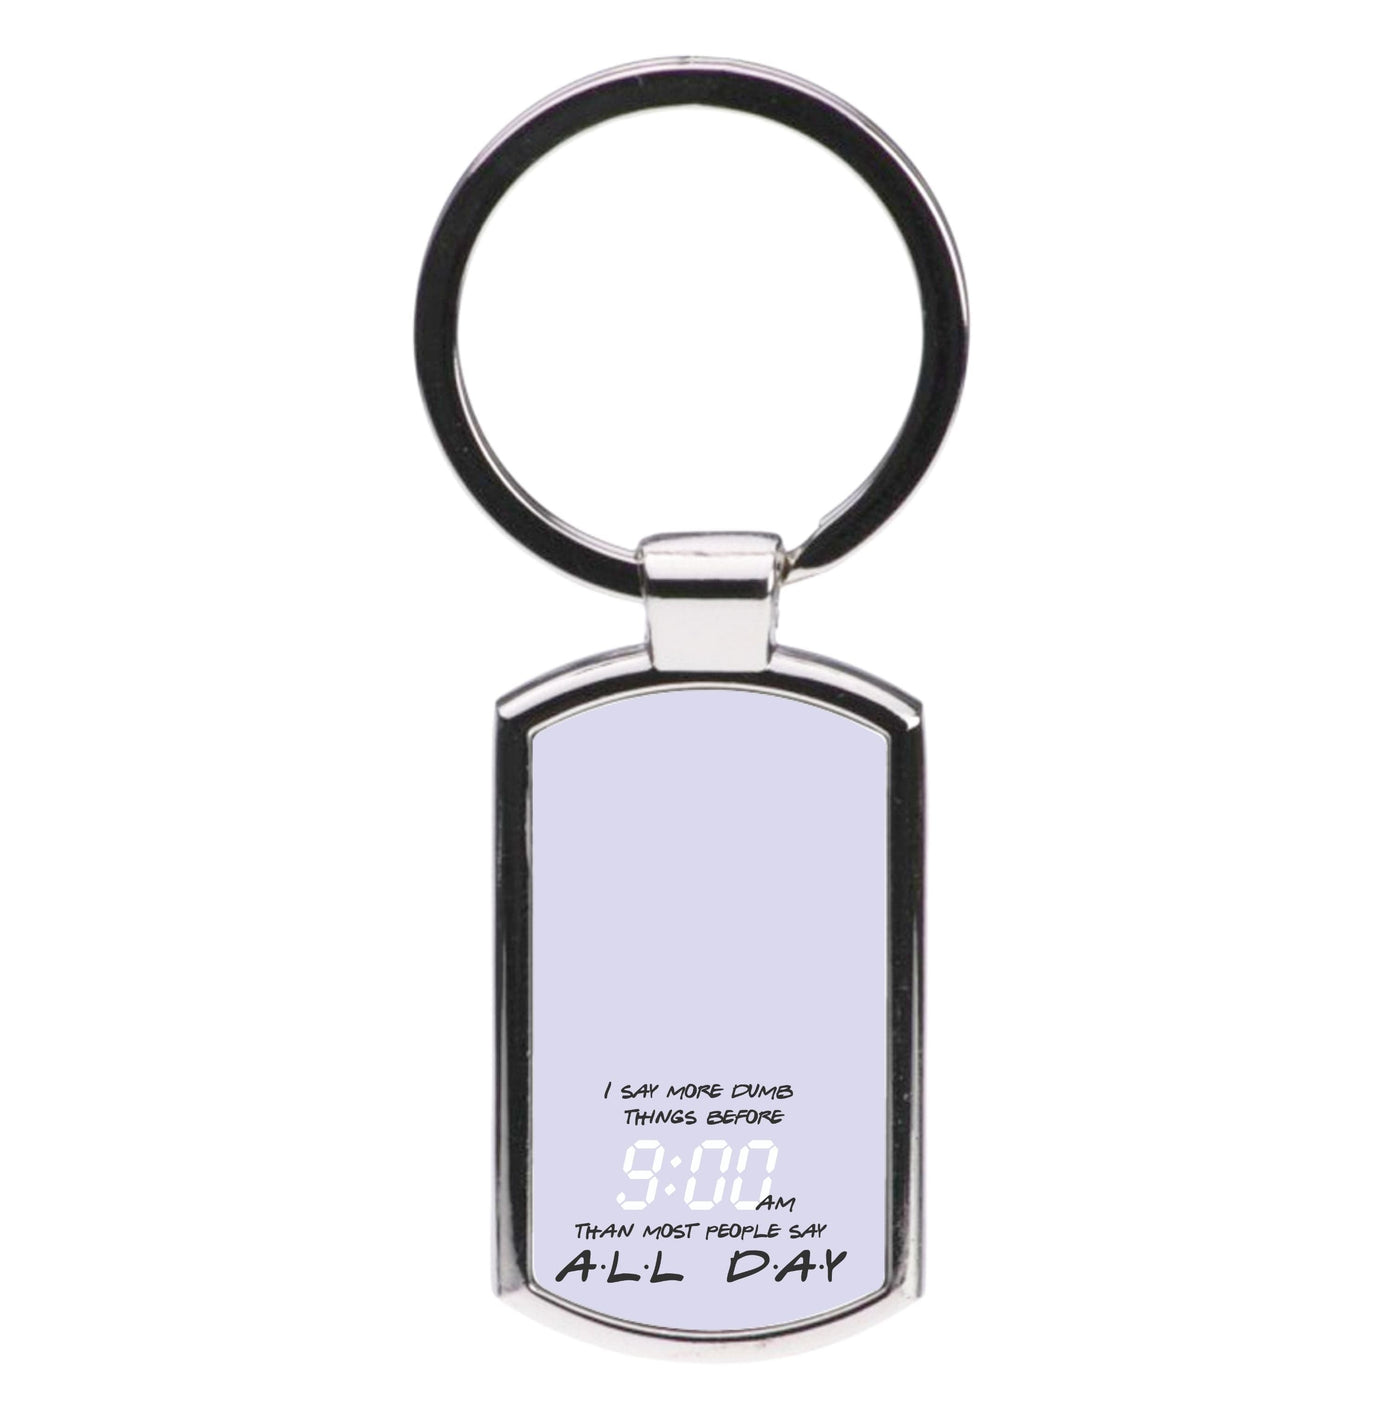 I Say More Dumb - TV Quotes Luxury Keyring